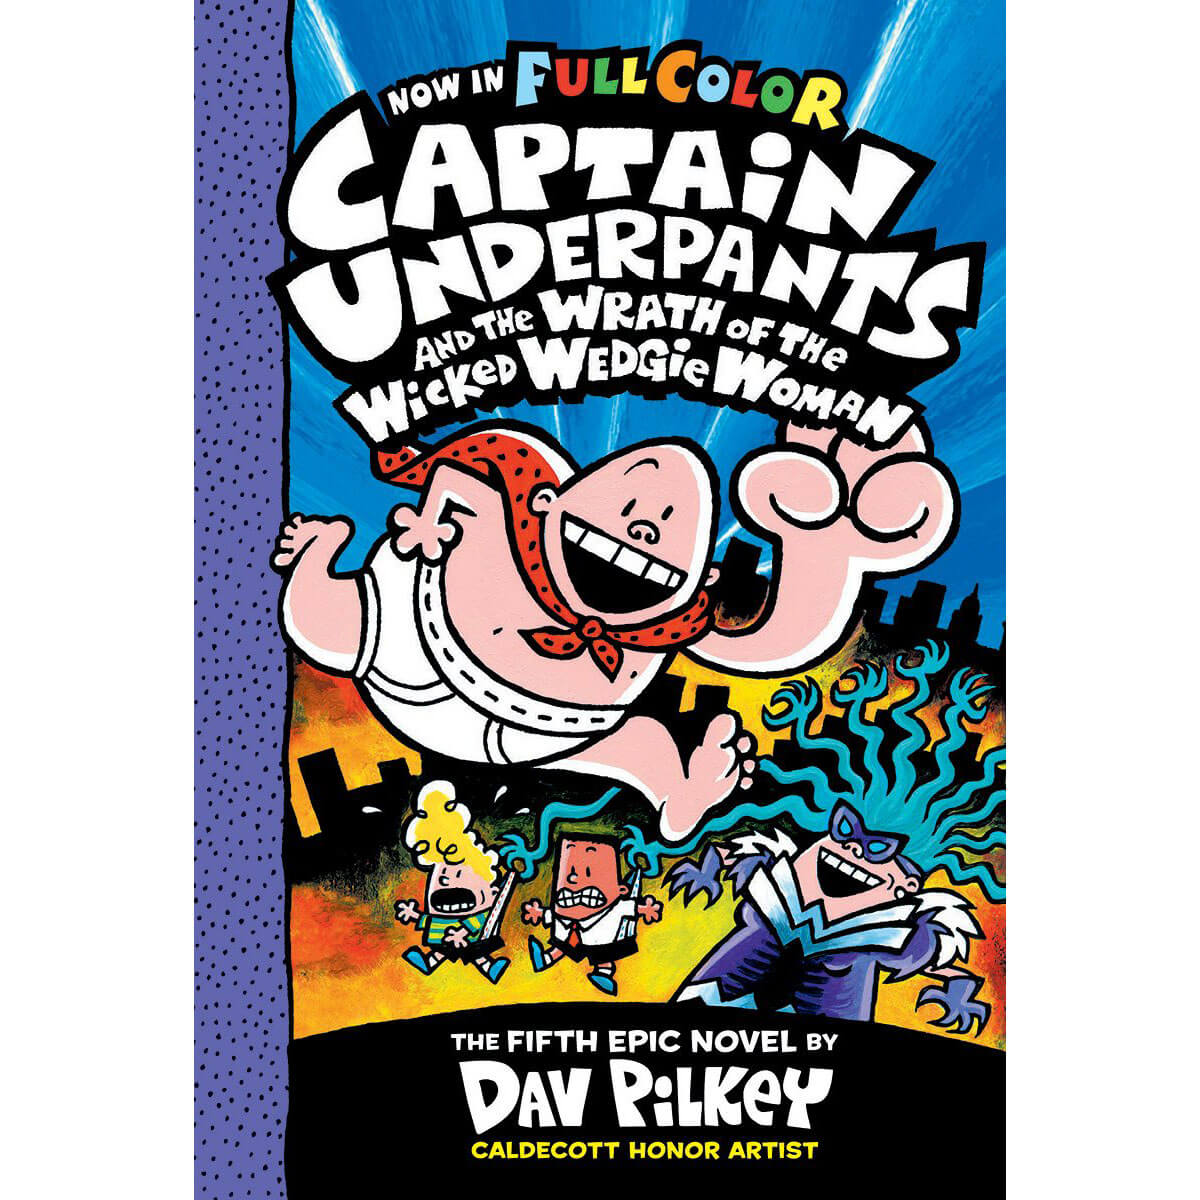 Captain Underpants Wrath of the Wicked Wedgie Woman Color (#5)